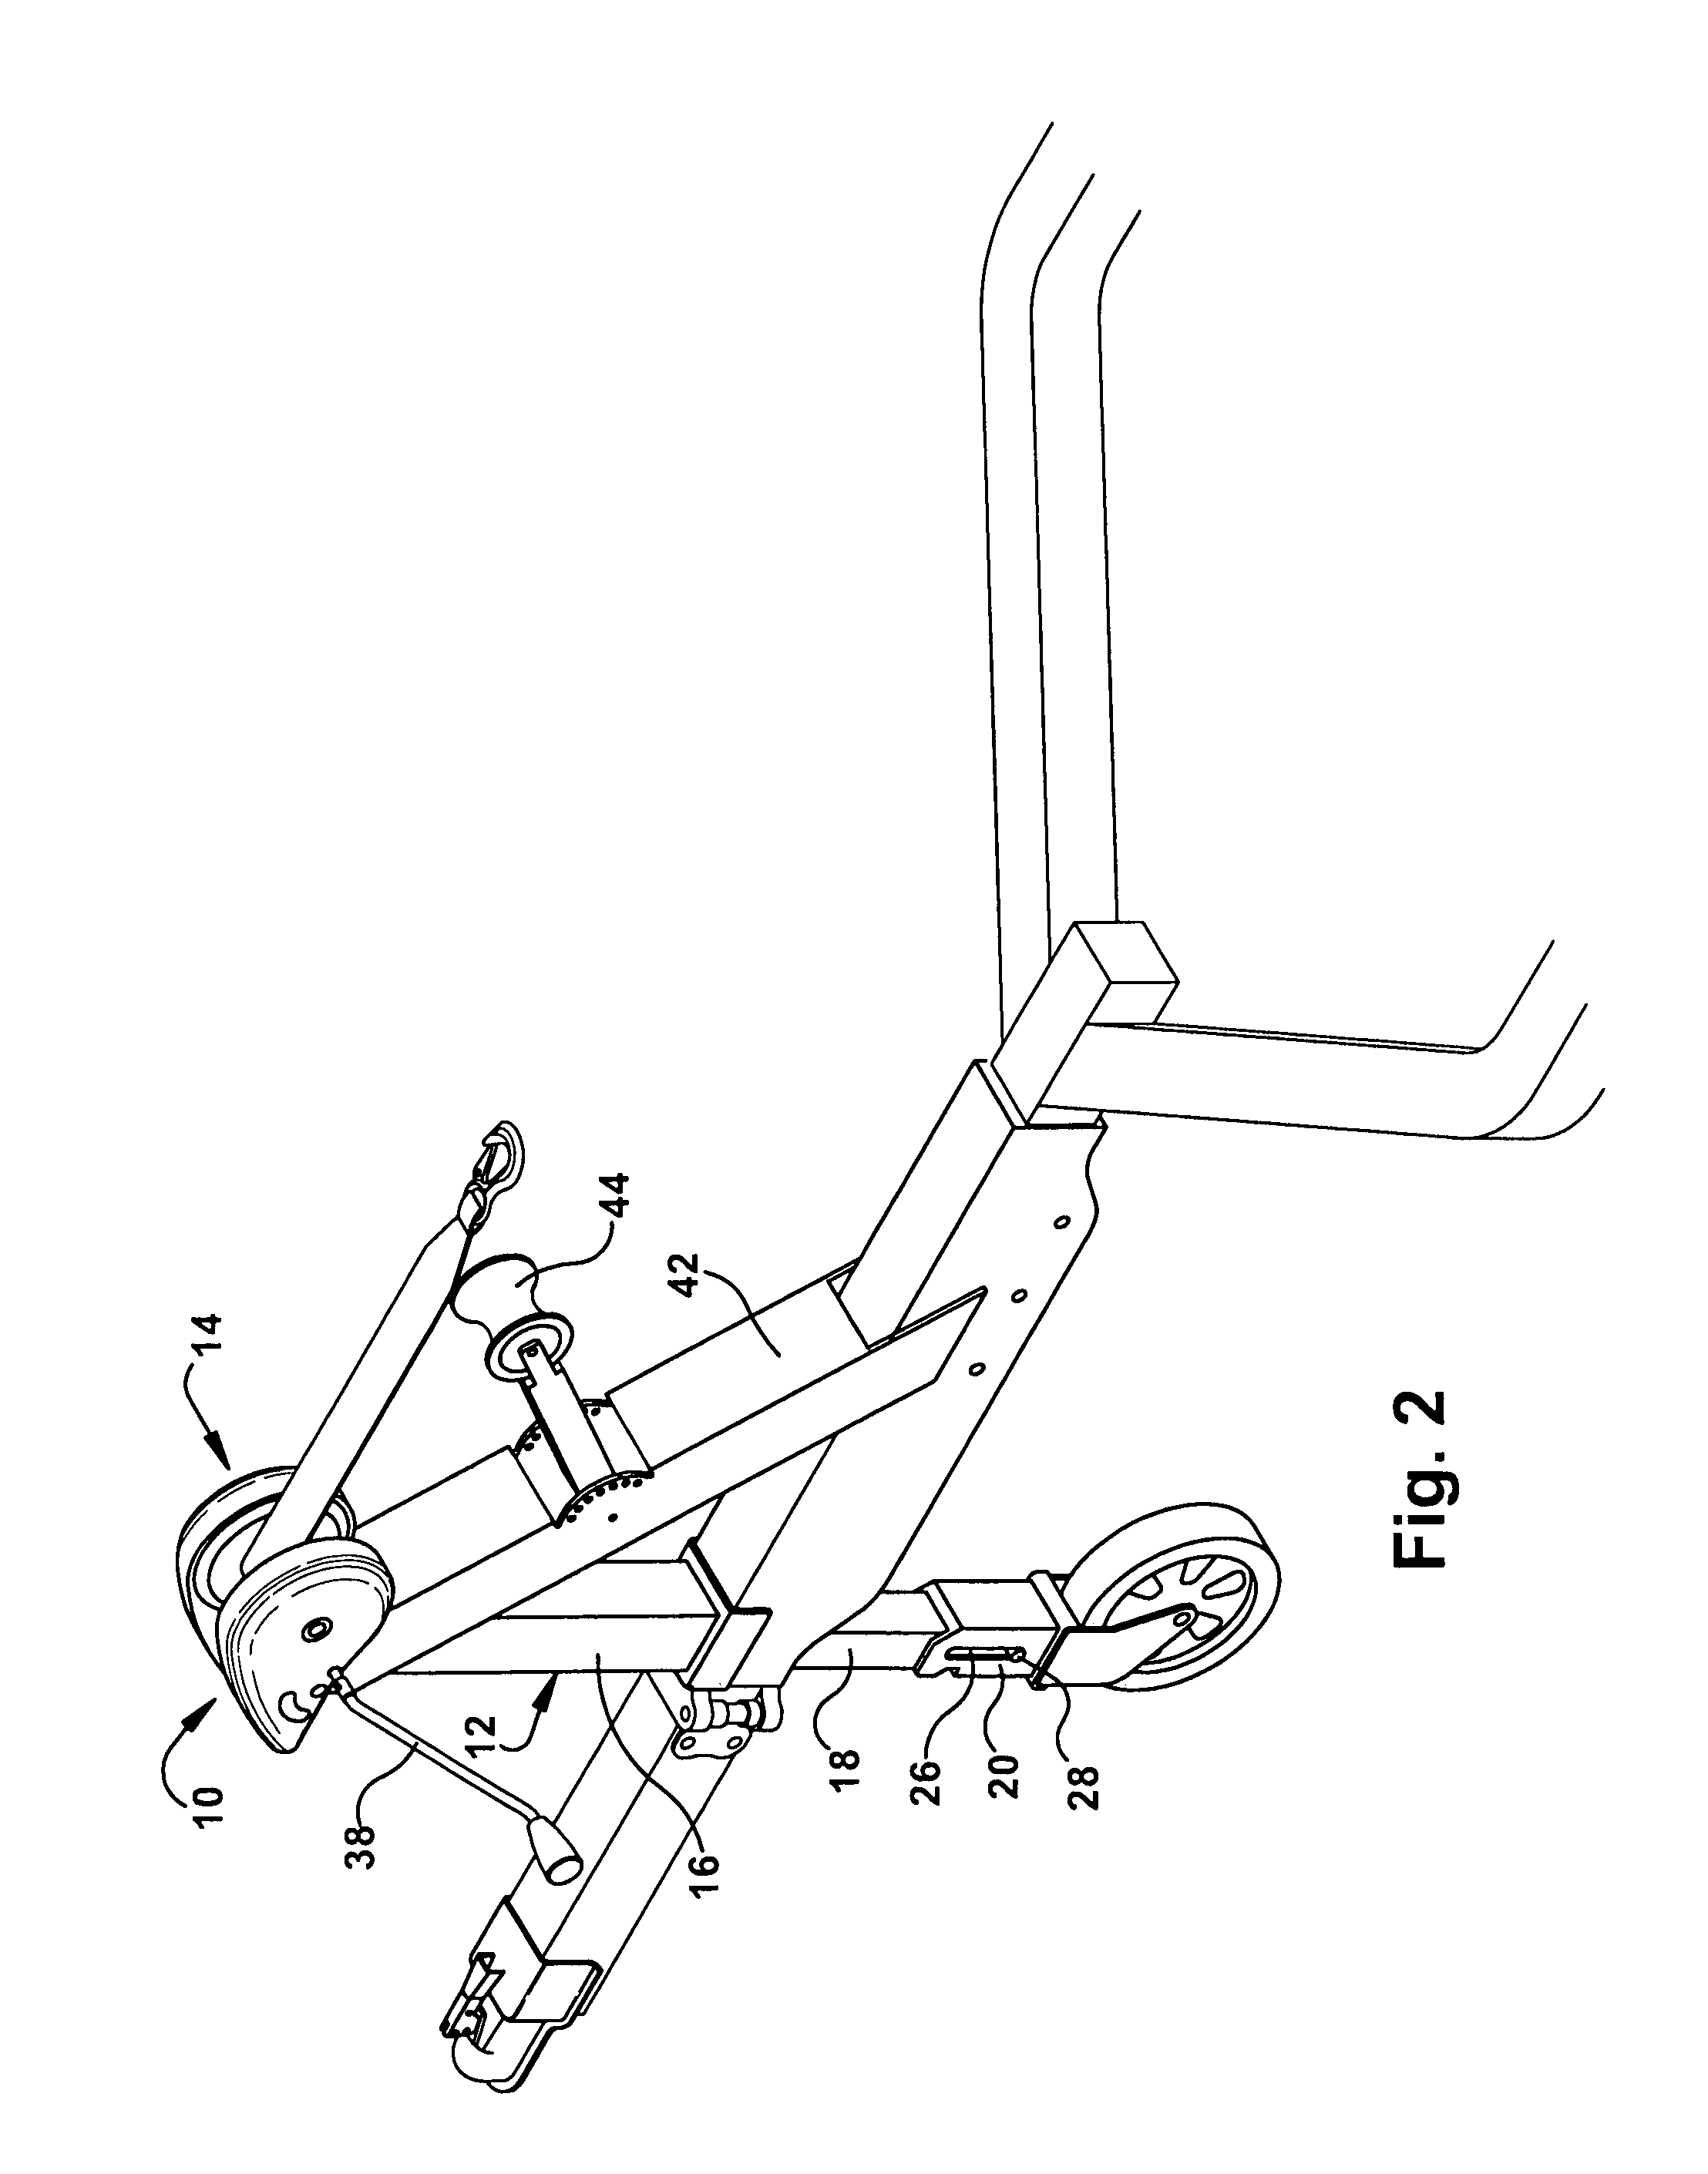 Integrated jack and winch assembly